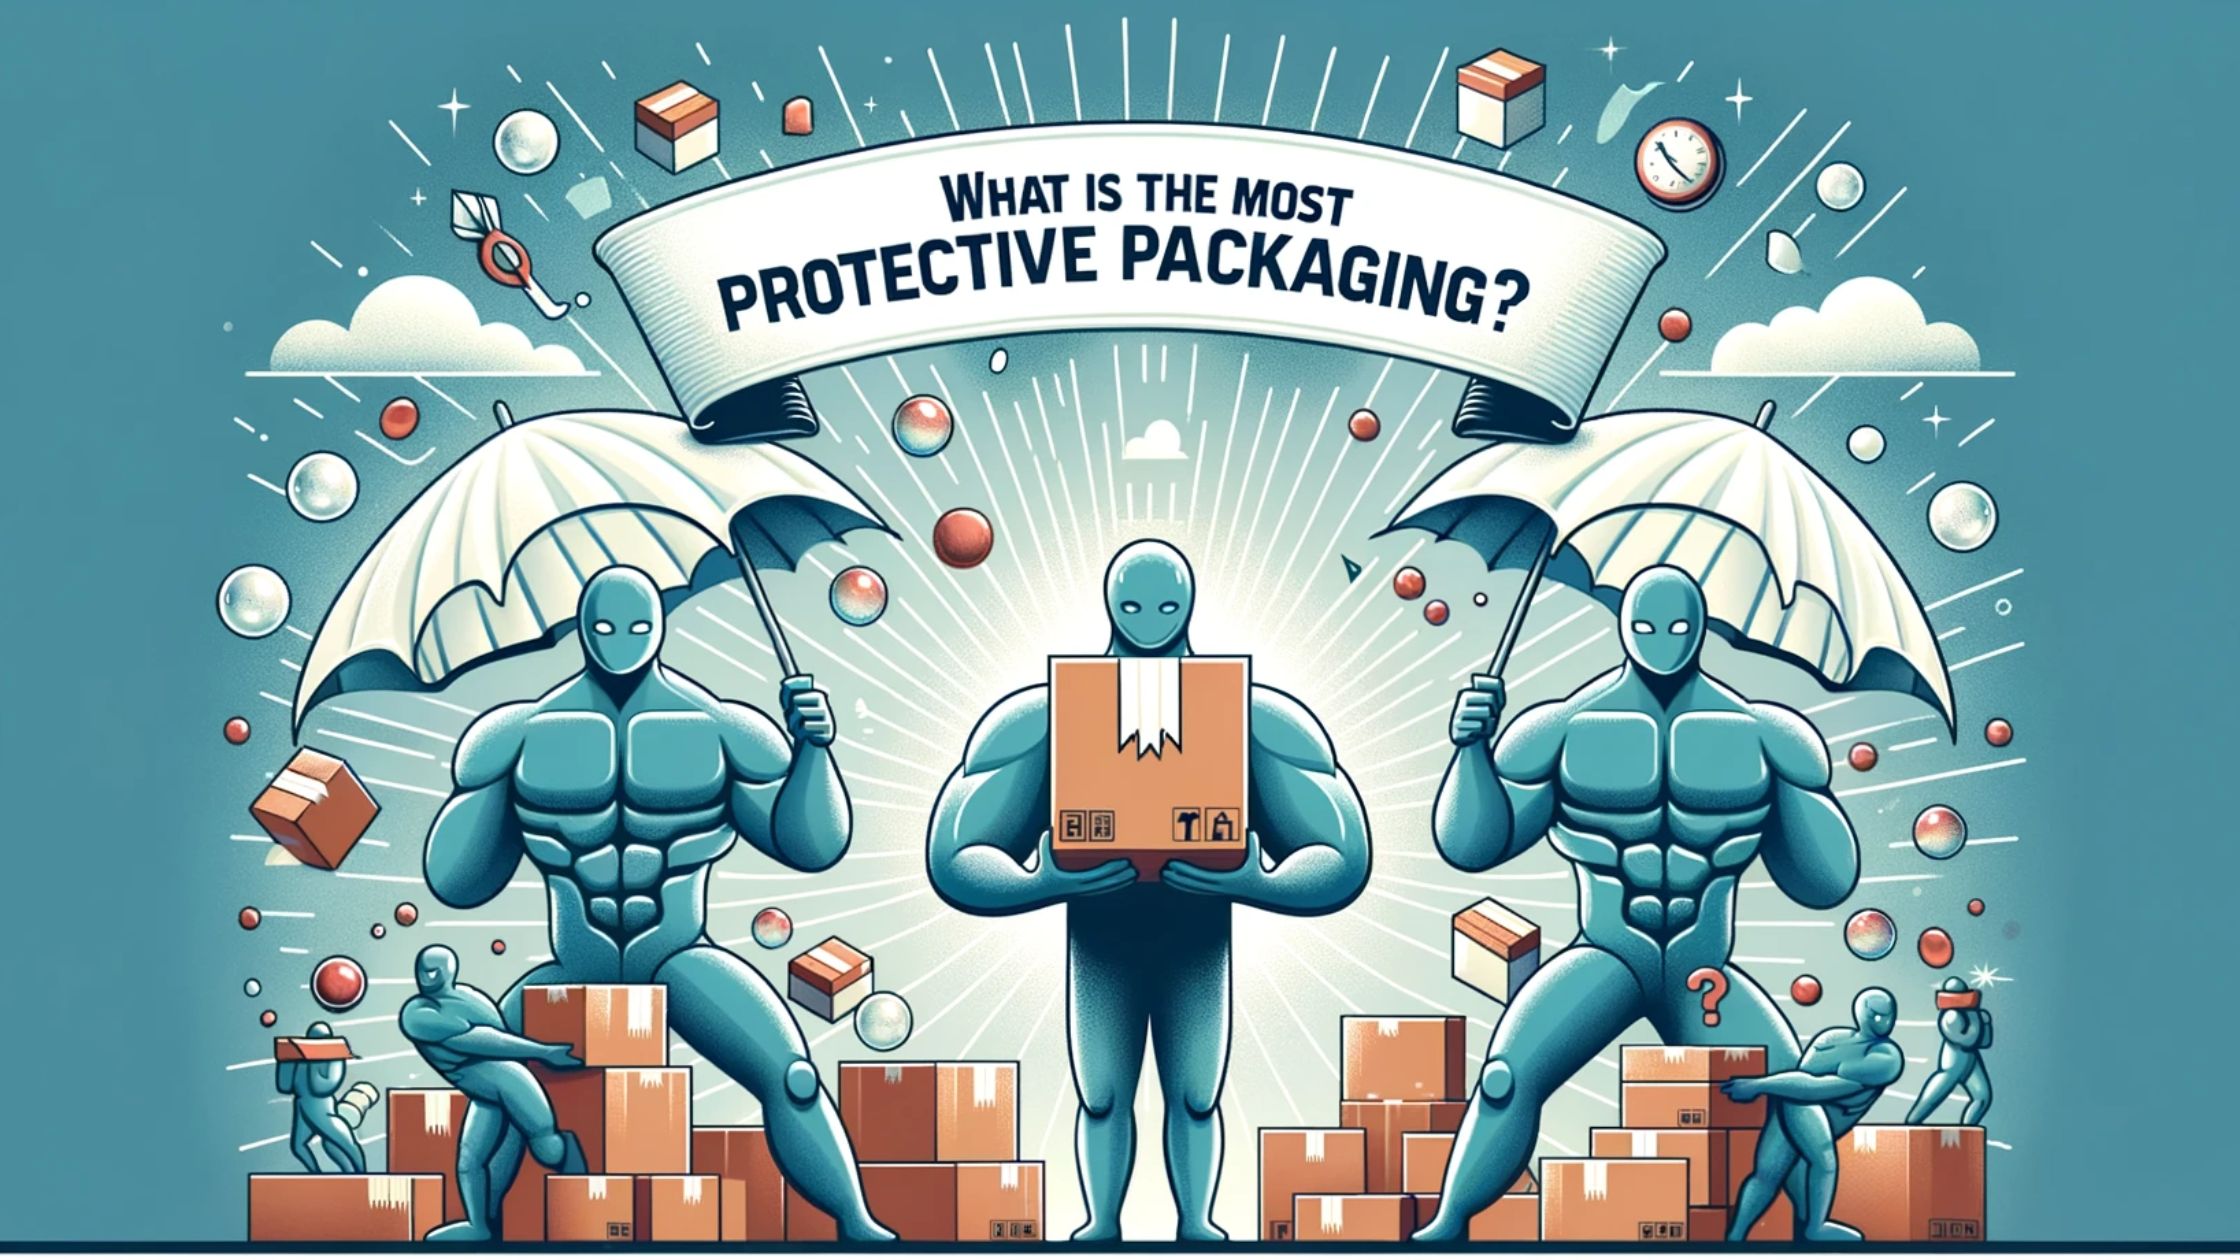 What Is the Most Protective Packaging?